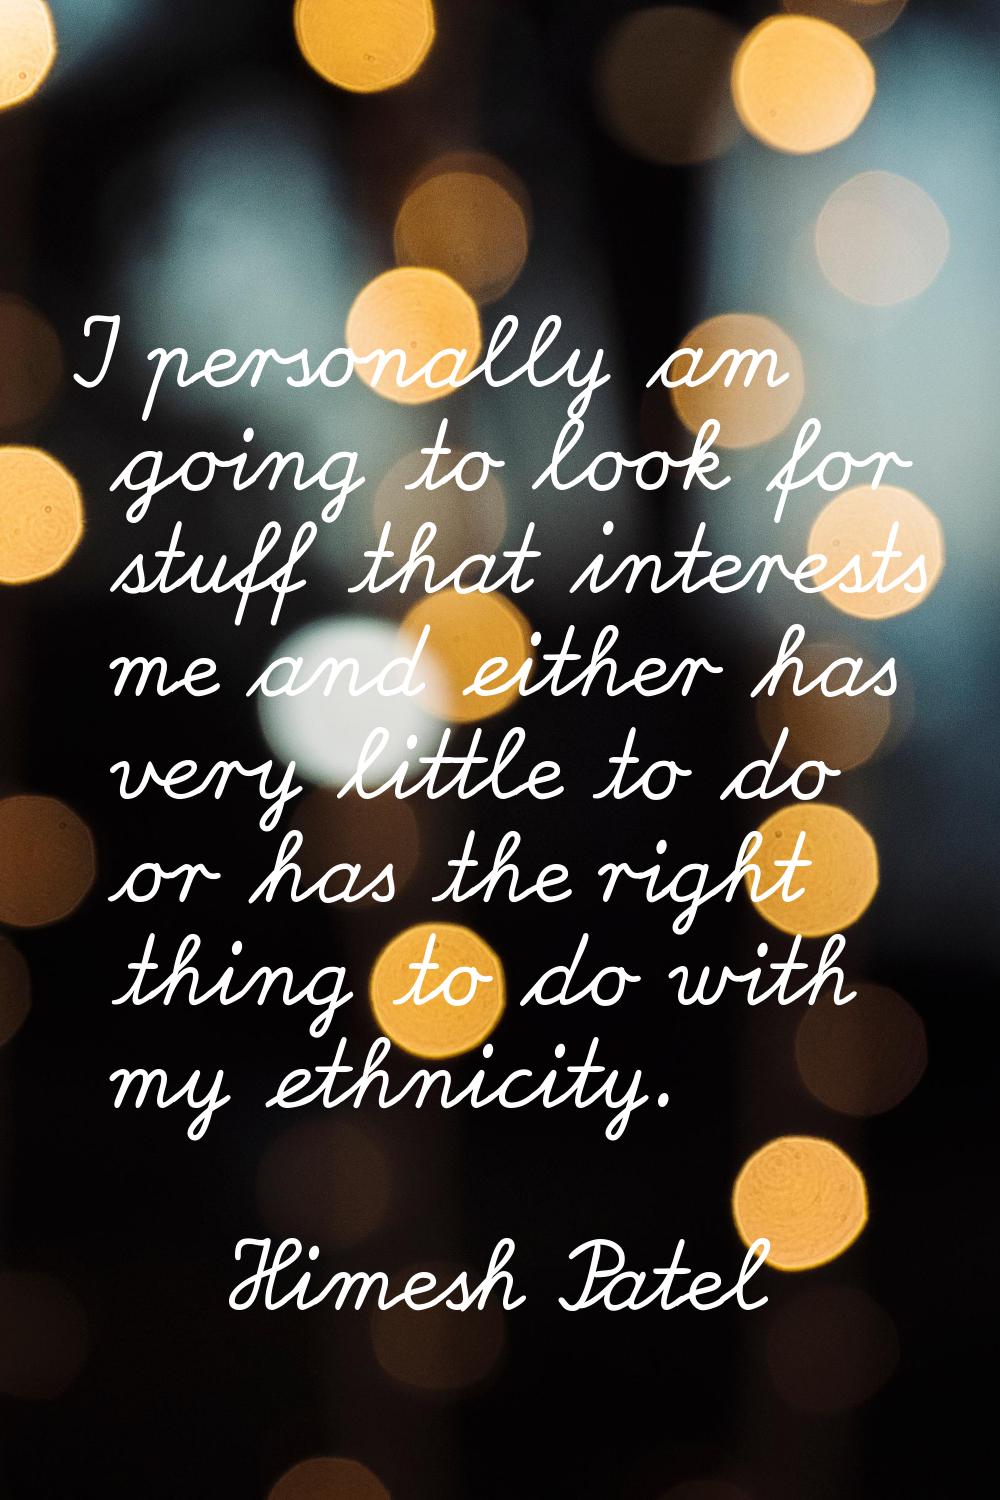 I personally am going to look for stuff that interests me and either has very little to do or has t